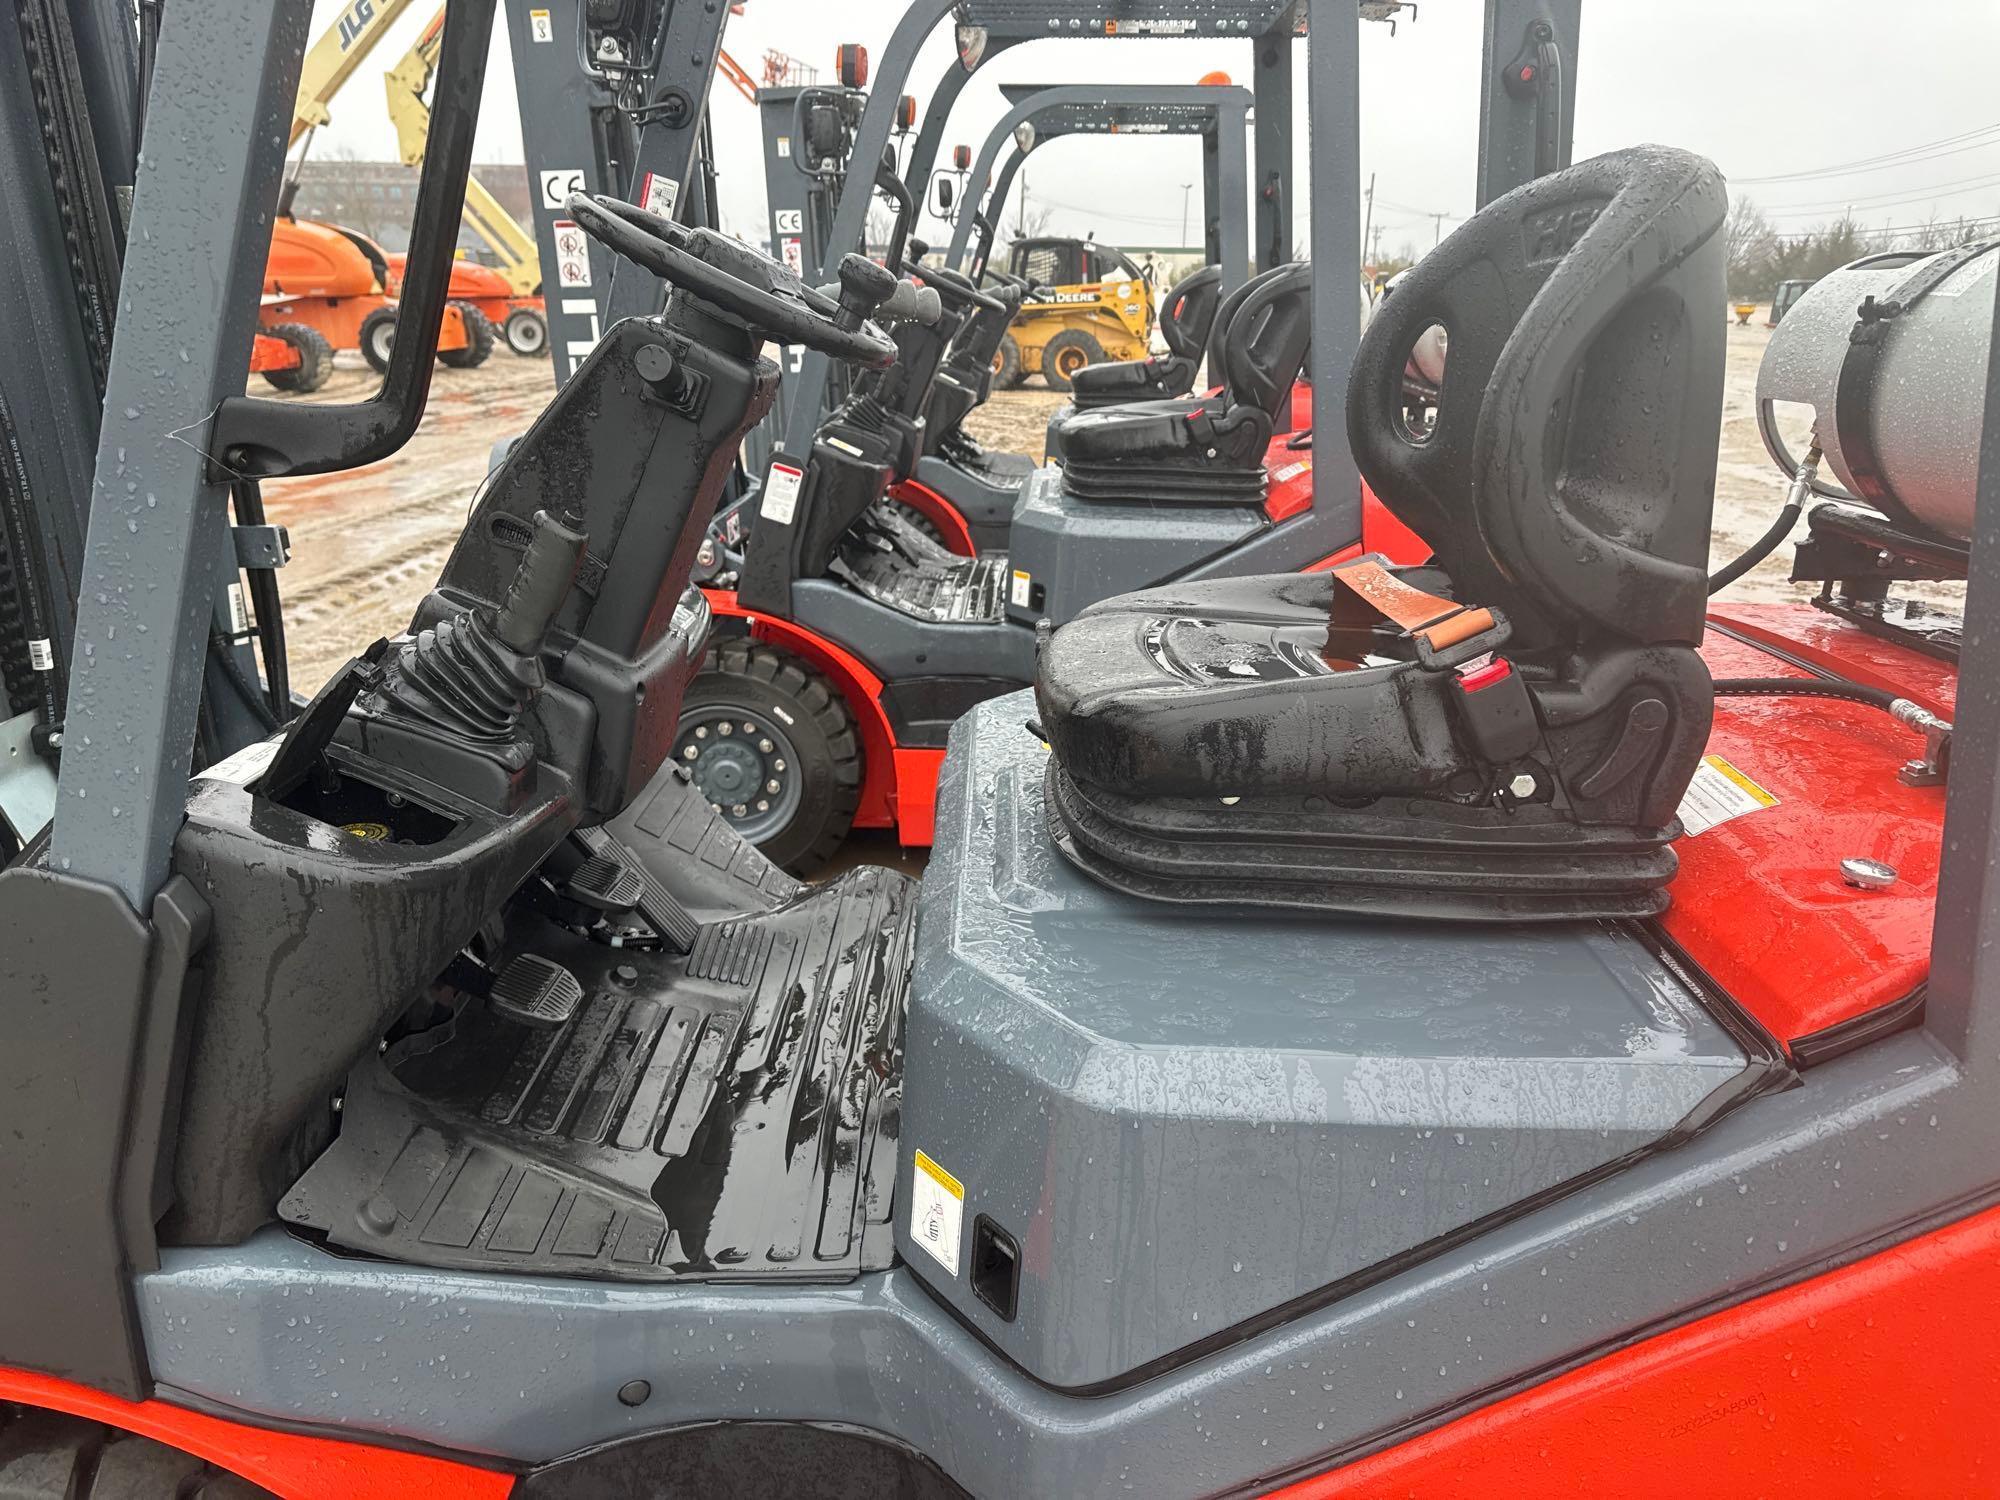 NEW HELI CPYD25 FORKLIFT SN:A8961 powered by LP engine, equipped with OROPS, 5,000lb lift capacity,